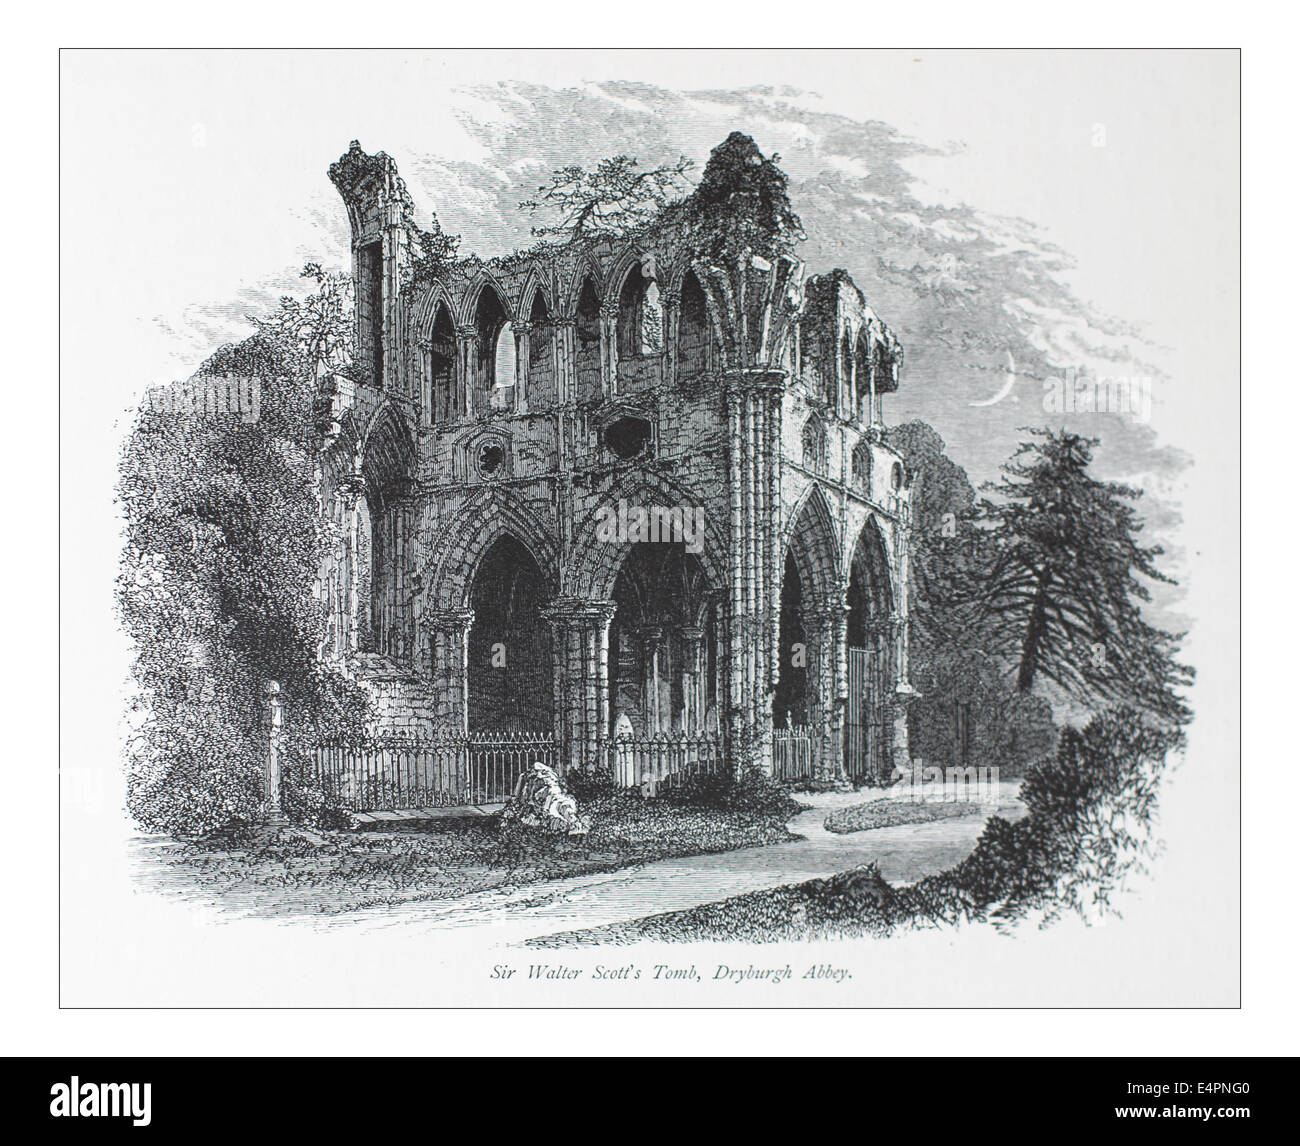 The Tomb of Sir Walter Scott, in Dryburgh Abbey Illustration from 'The British isles - Cassell Petter & Galpin Part 8 Picturesque Europe. Picturesque Europe was an illustrated set of Magazines published by Cassell, Petter, Galpin & Co. of London, Paris and New York in 1877. The publications depicted tourist haunts in Europe, with text descriptions and steel and wood engravings by eminent artists of the time, such as Harry Fenn, William H J Boot, Thomas C. L. Rowbotham, Henry T. Green , Myles B. Foster, John Mogford , David H. McKewan, William L. Leitch, Edmund M. Wimperis and Joseph B. Smith. Stock Photo